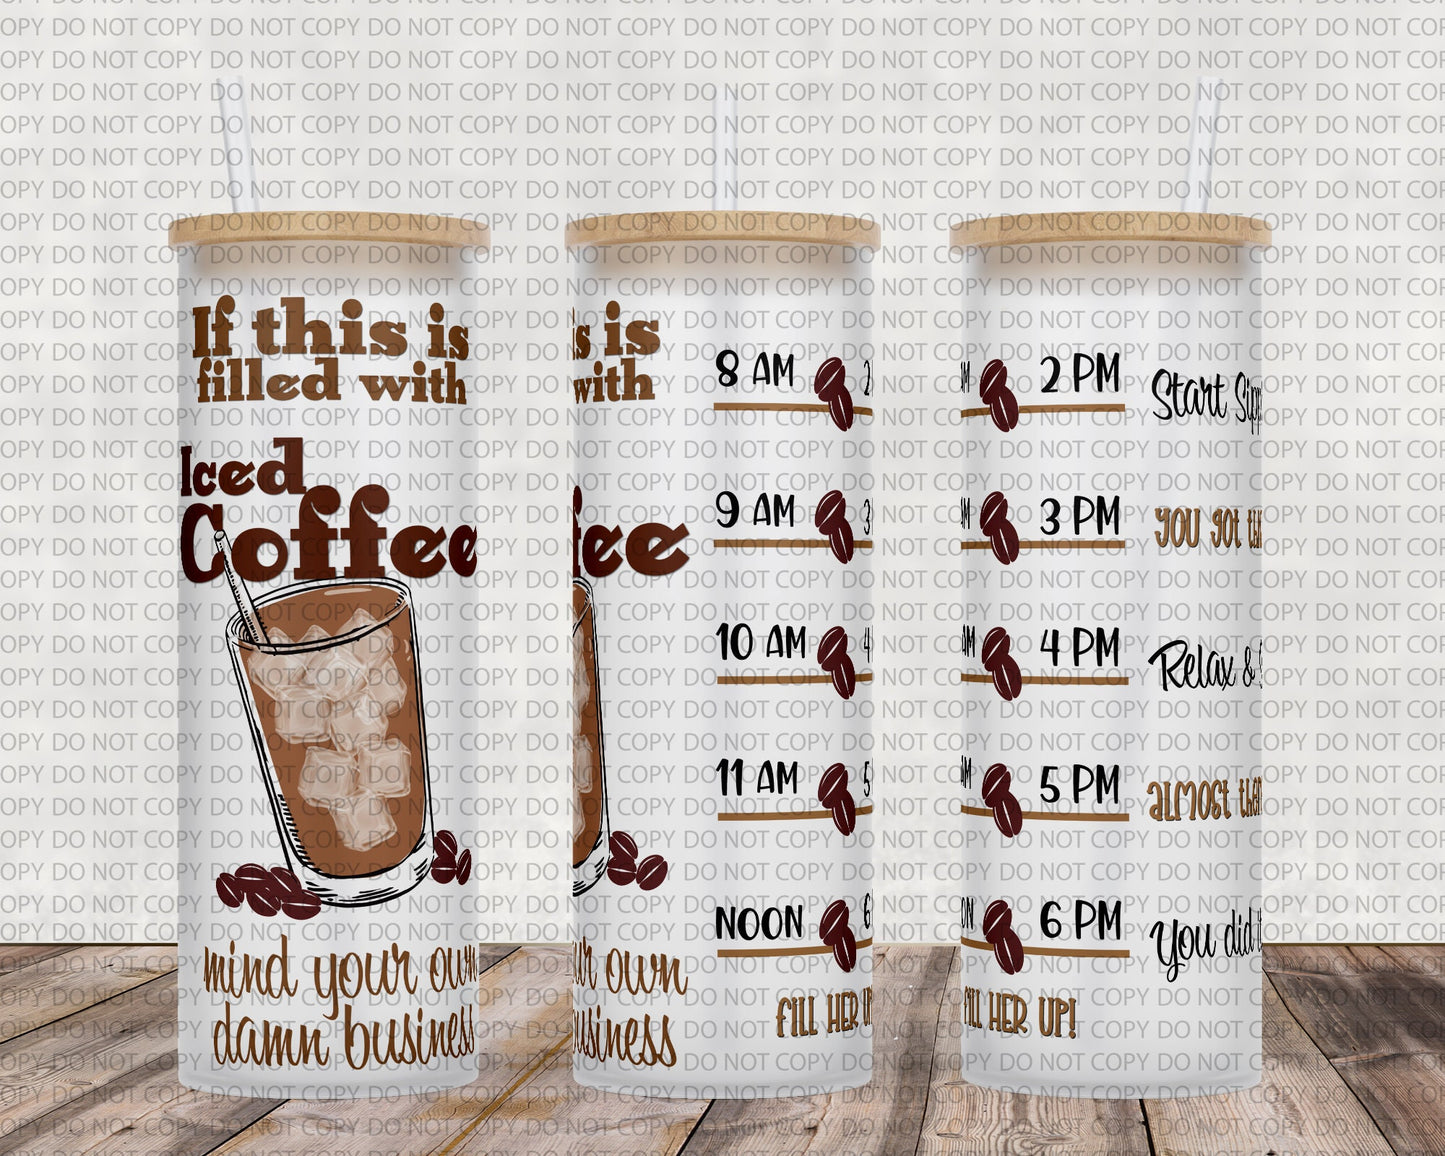 25 oz frosted glass tumbler png, Iced coffee Tumbler template water tracker High res PNG digital file_PG version